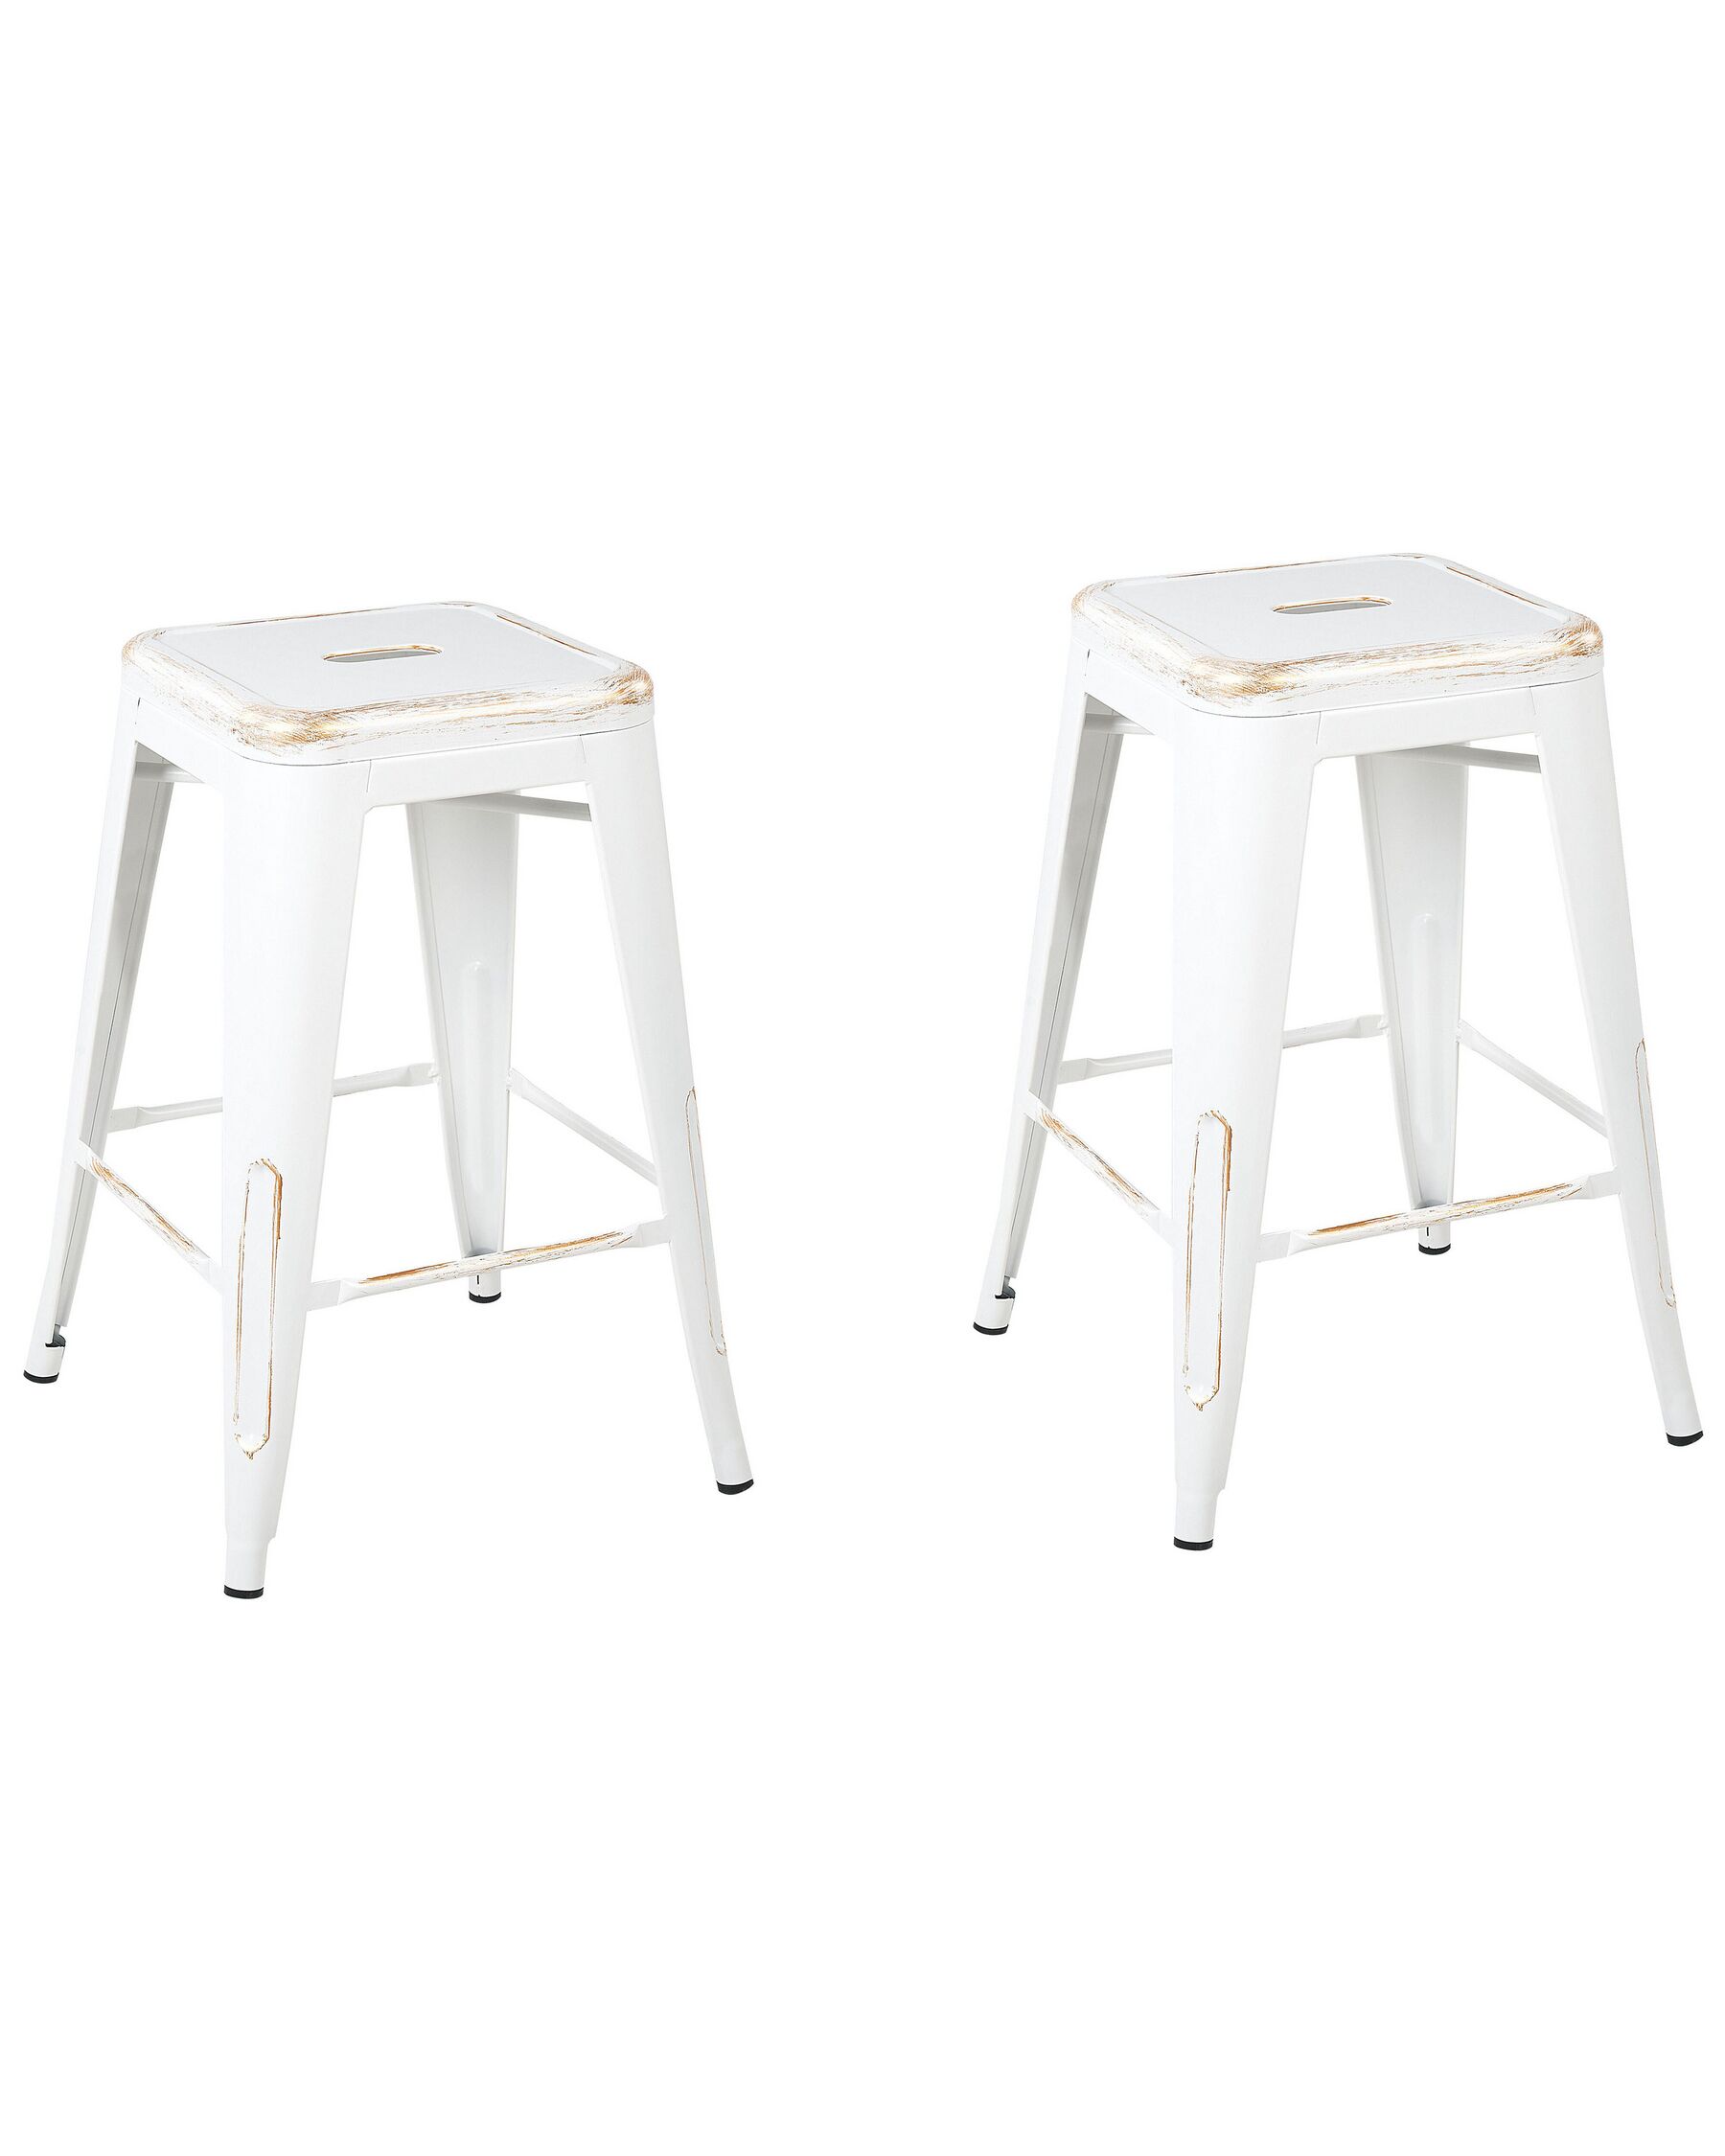 Set of 2 Steel  Stools 60 cm White with Gold CABRILLO_694369